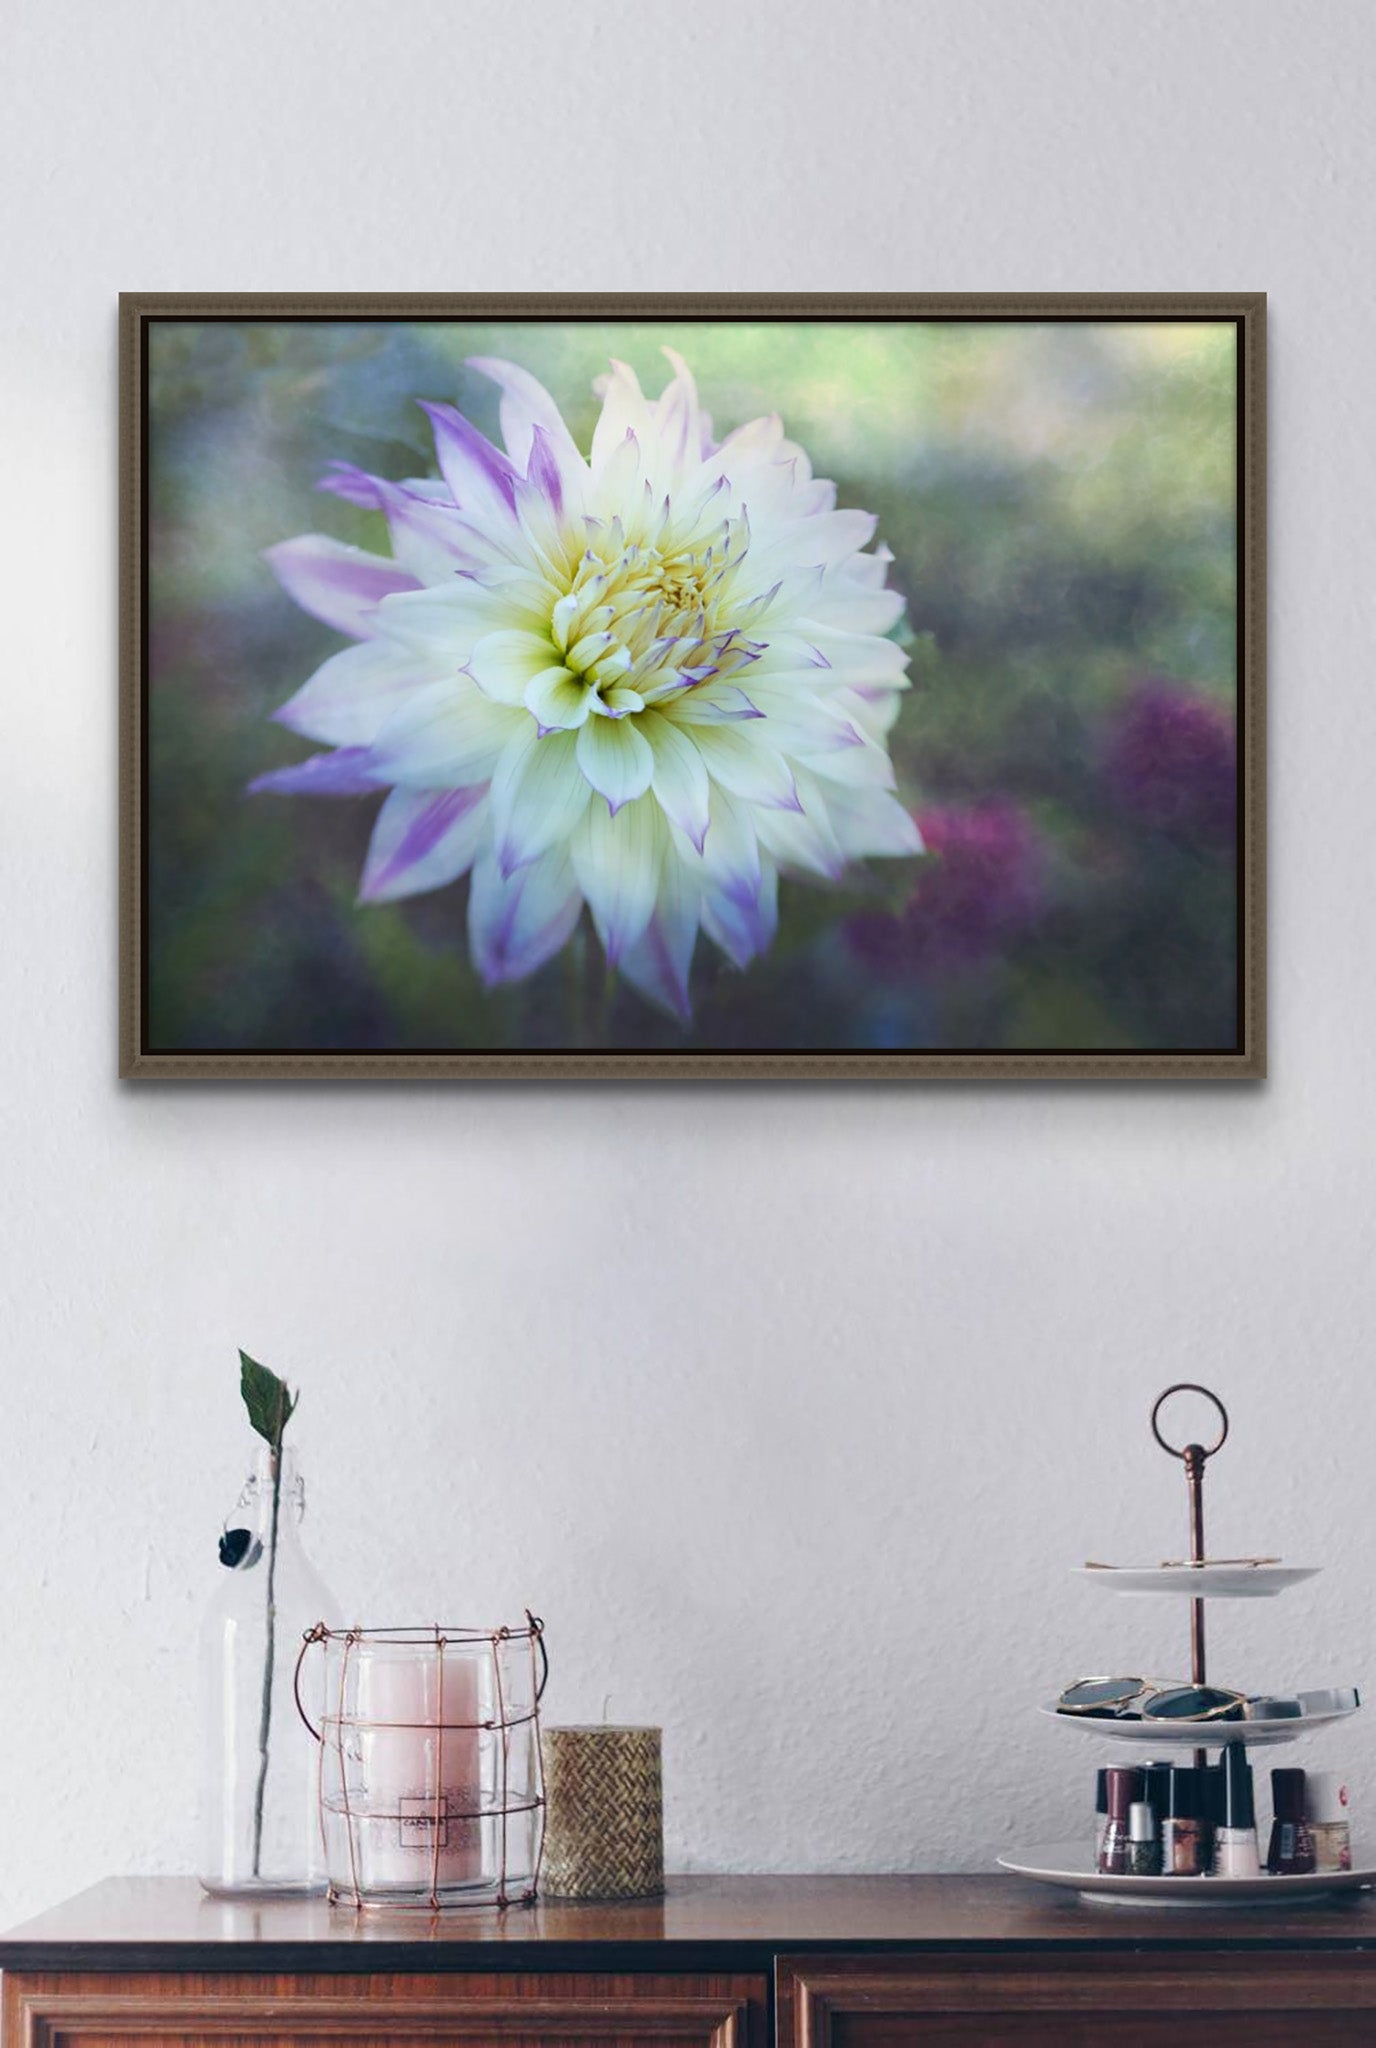 Picture on wall of a room. The Photograph is a metal print by Cameron Dreaux of a white and purple Dahlia against a misty morning backdrop. The photograph is framed in a float frame. There is a dresser with items on it as well. 